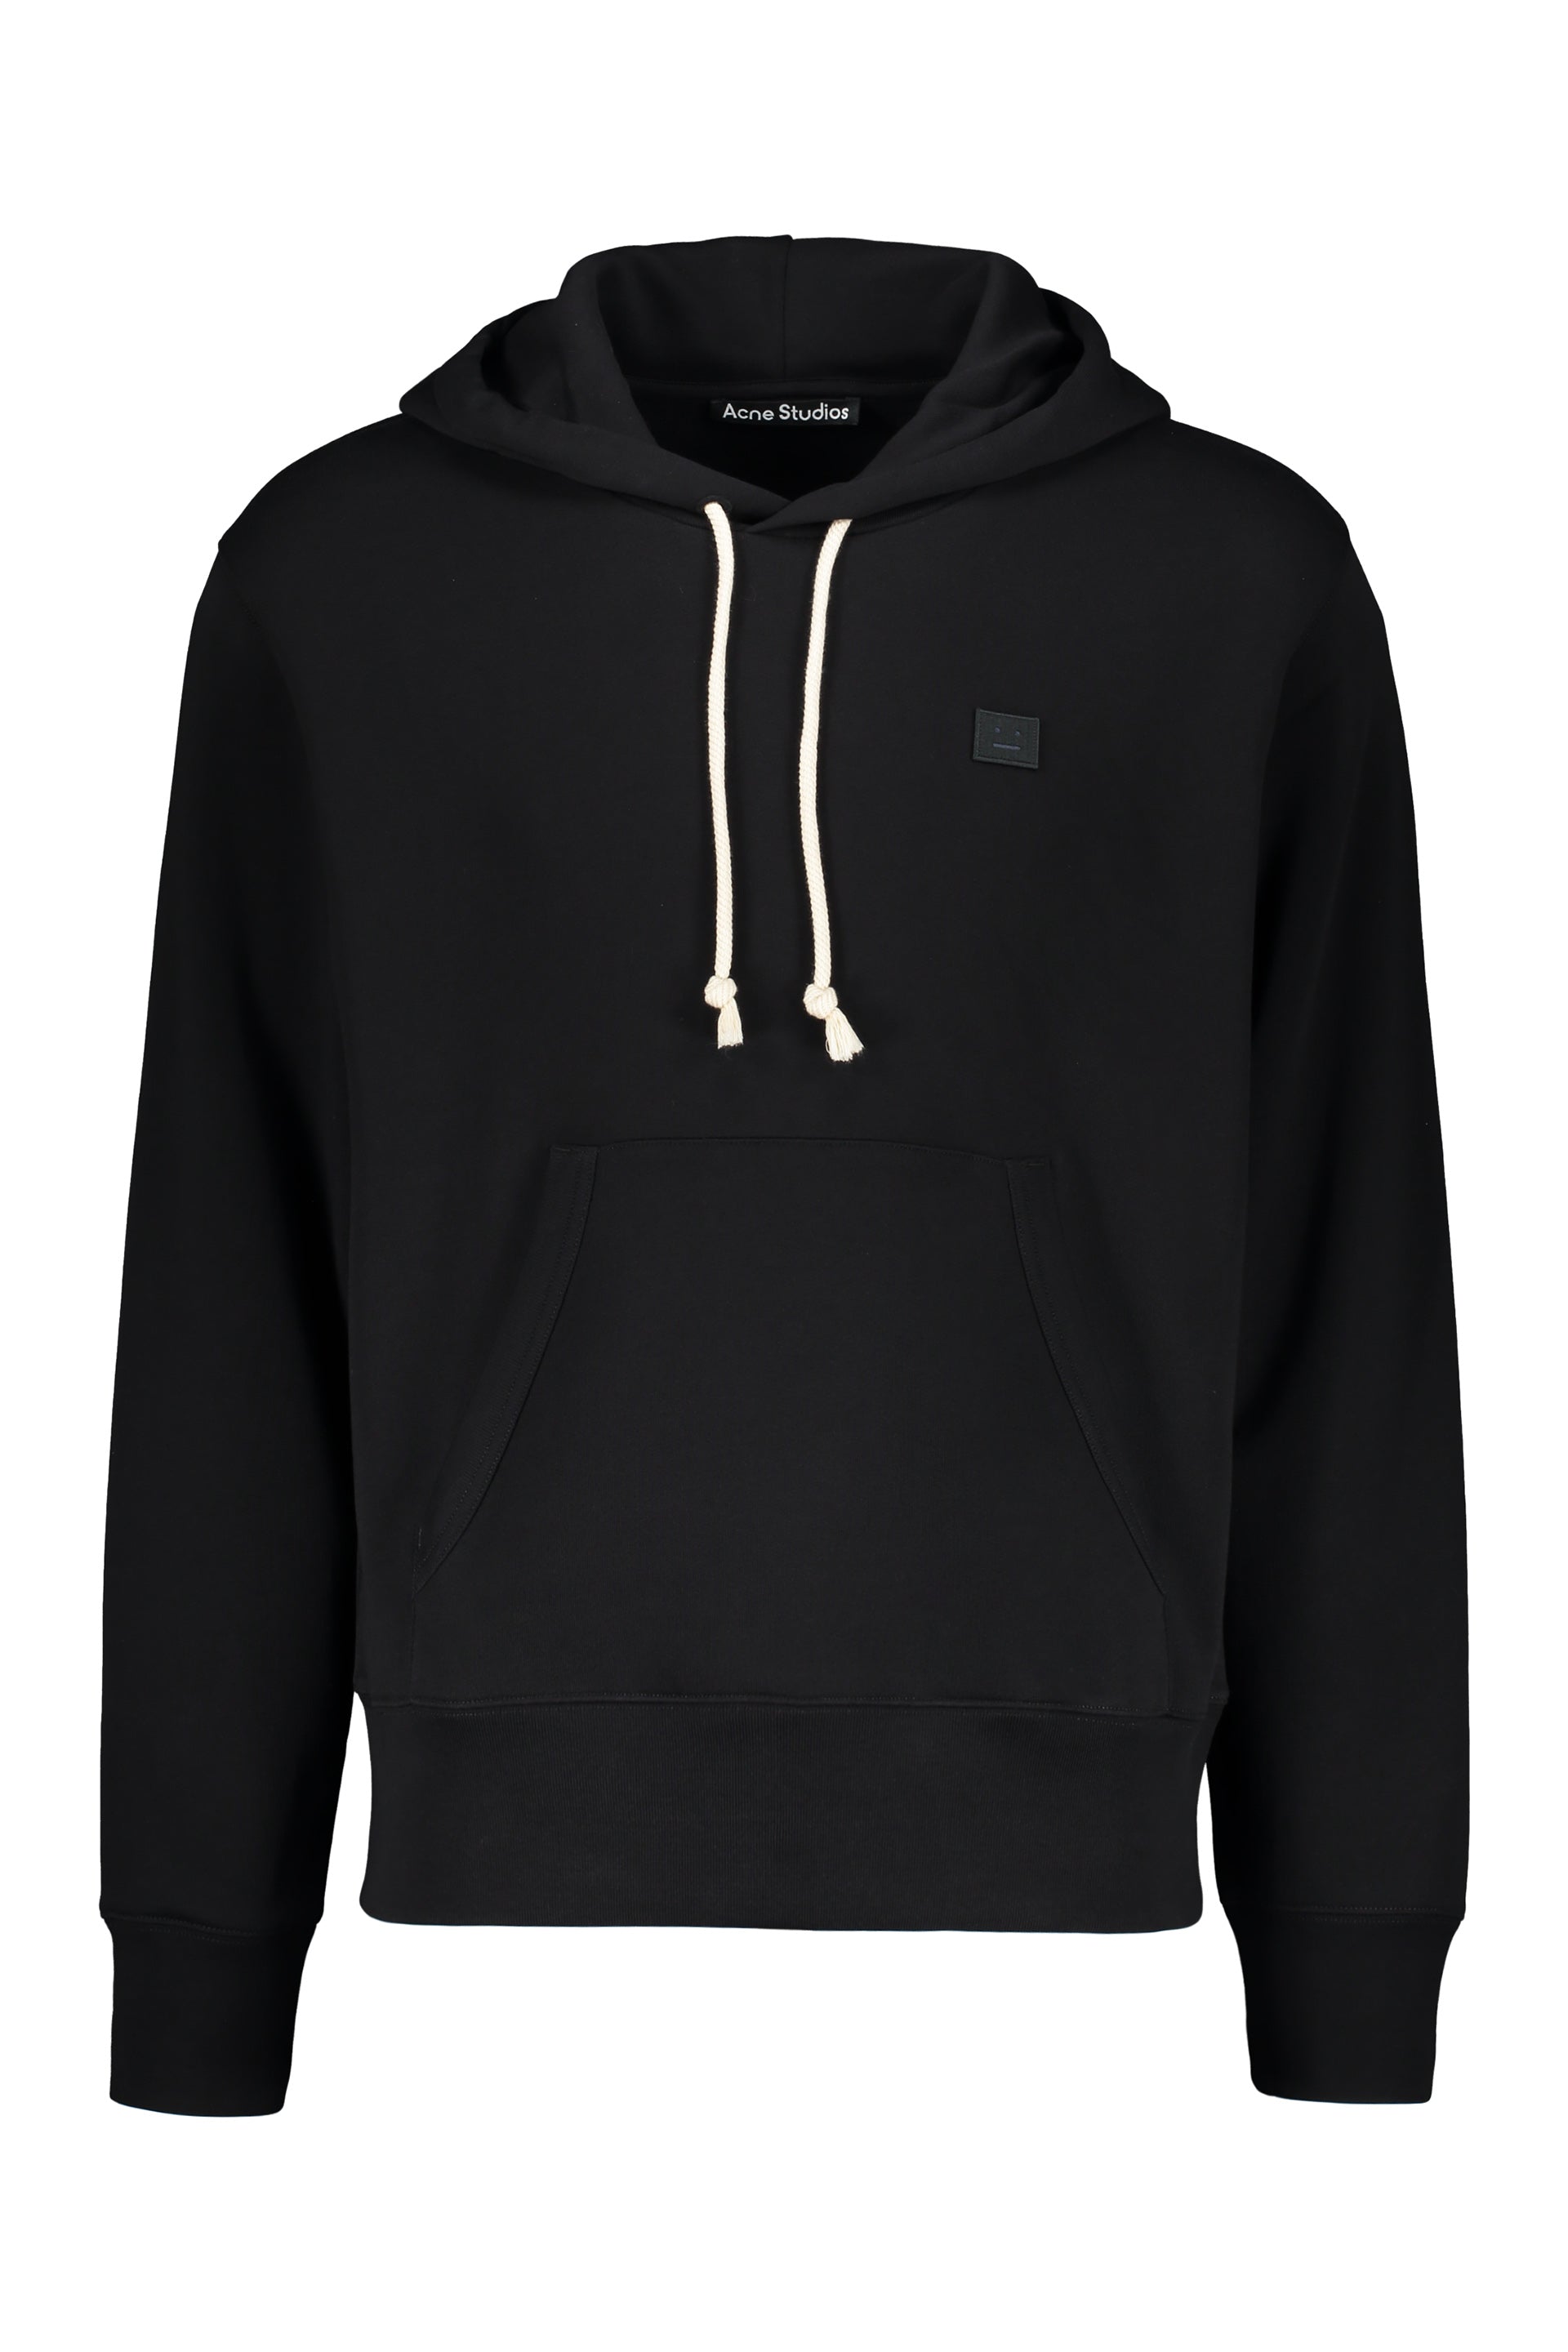 Acne-Studios-OUTLET-SALE-Hooded-sweatshirt-Strick-L-ARCHIVE-COLLECTION.jpg